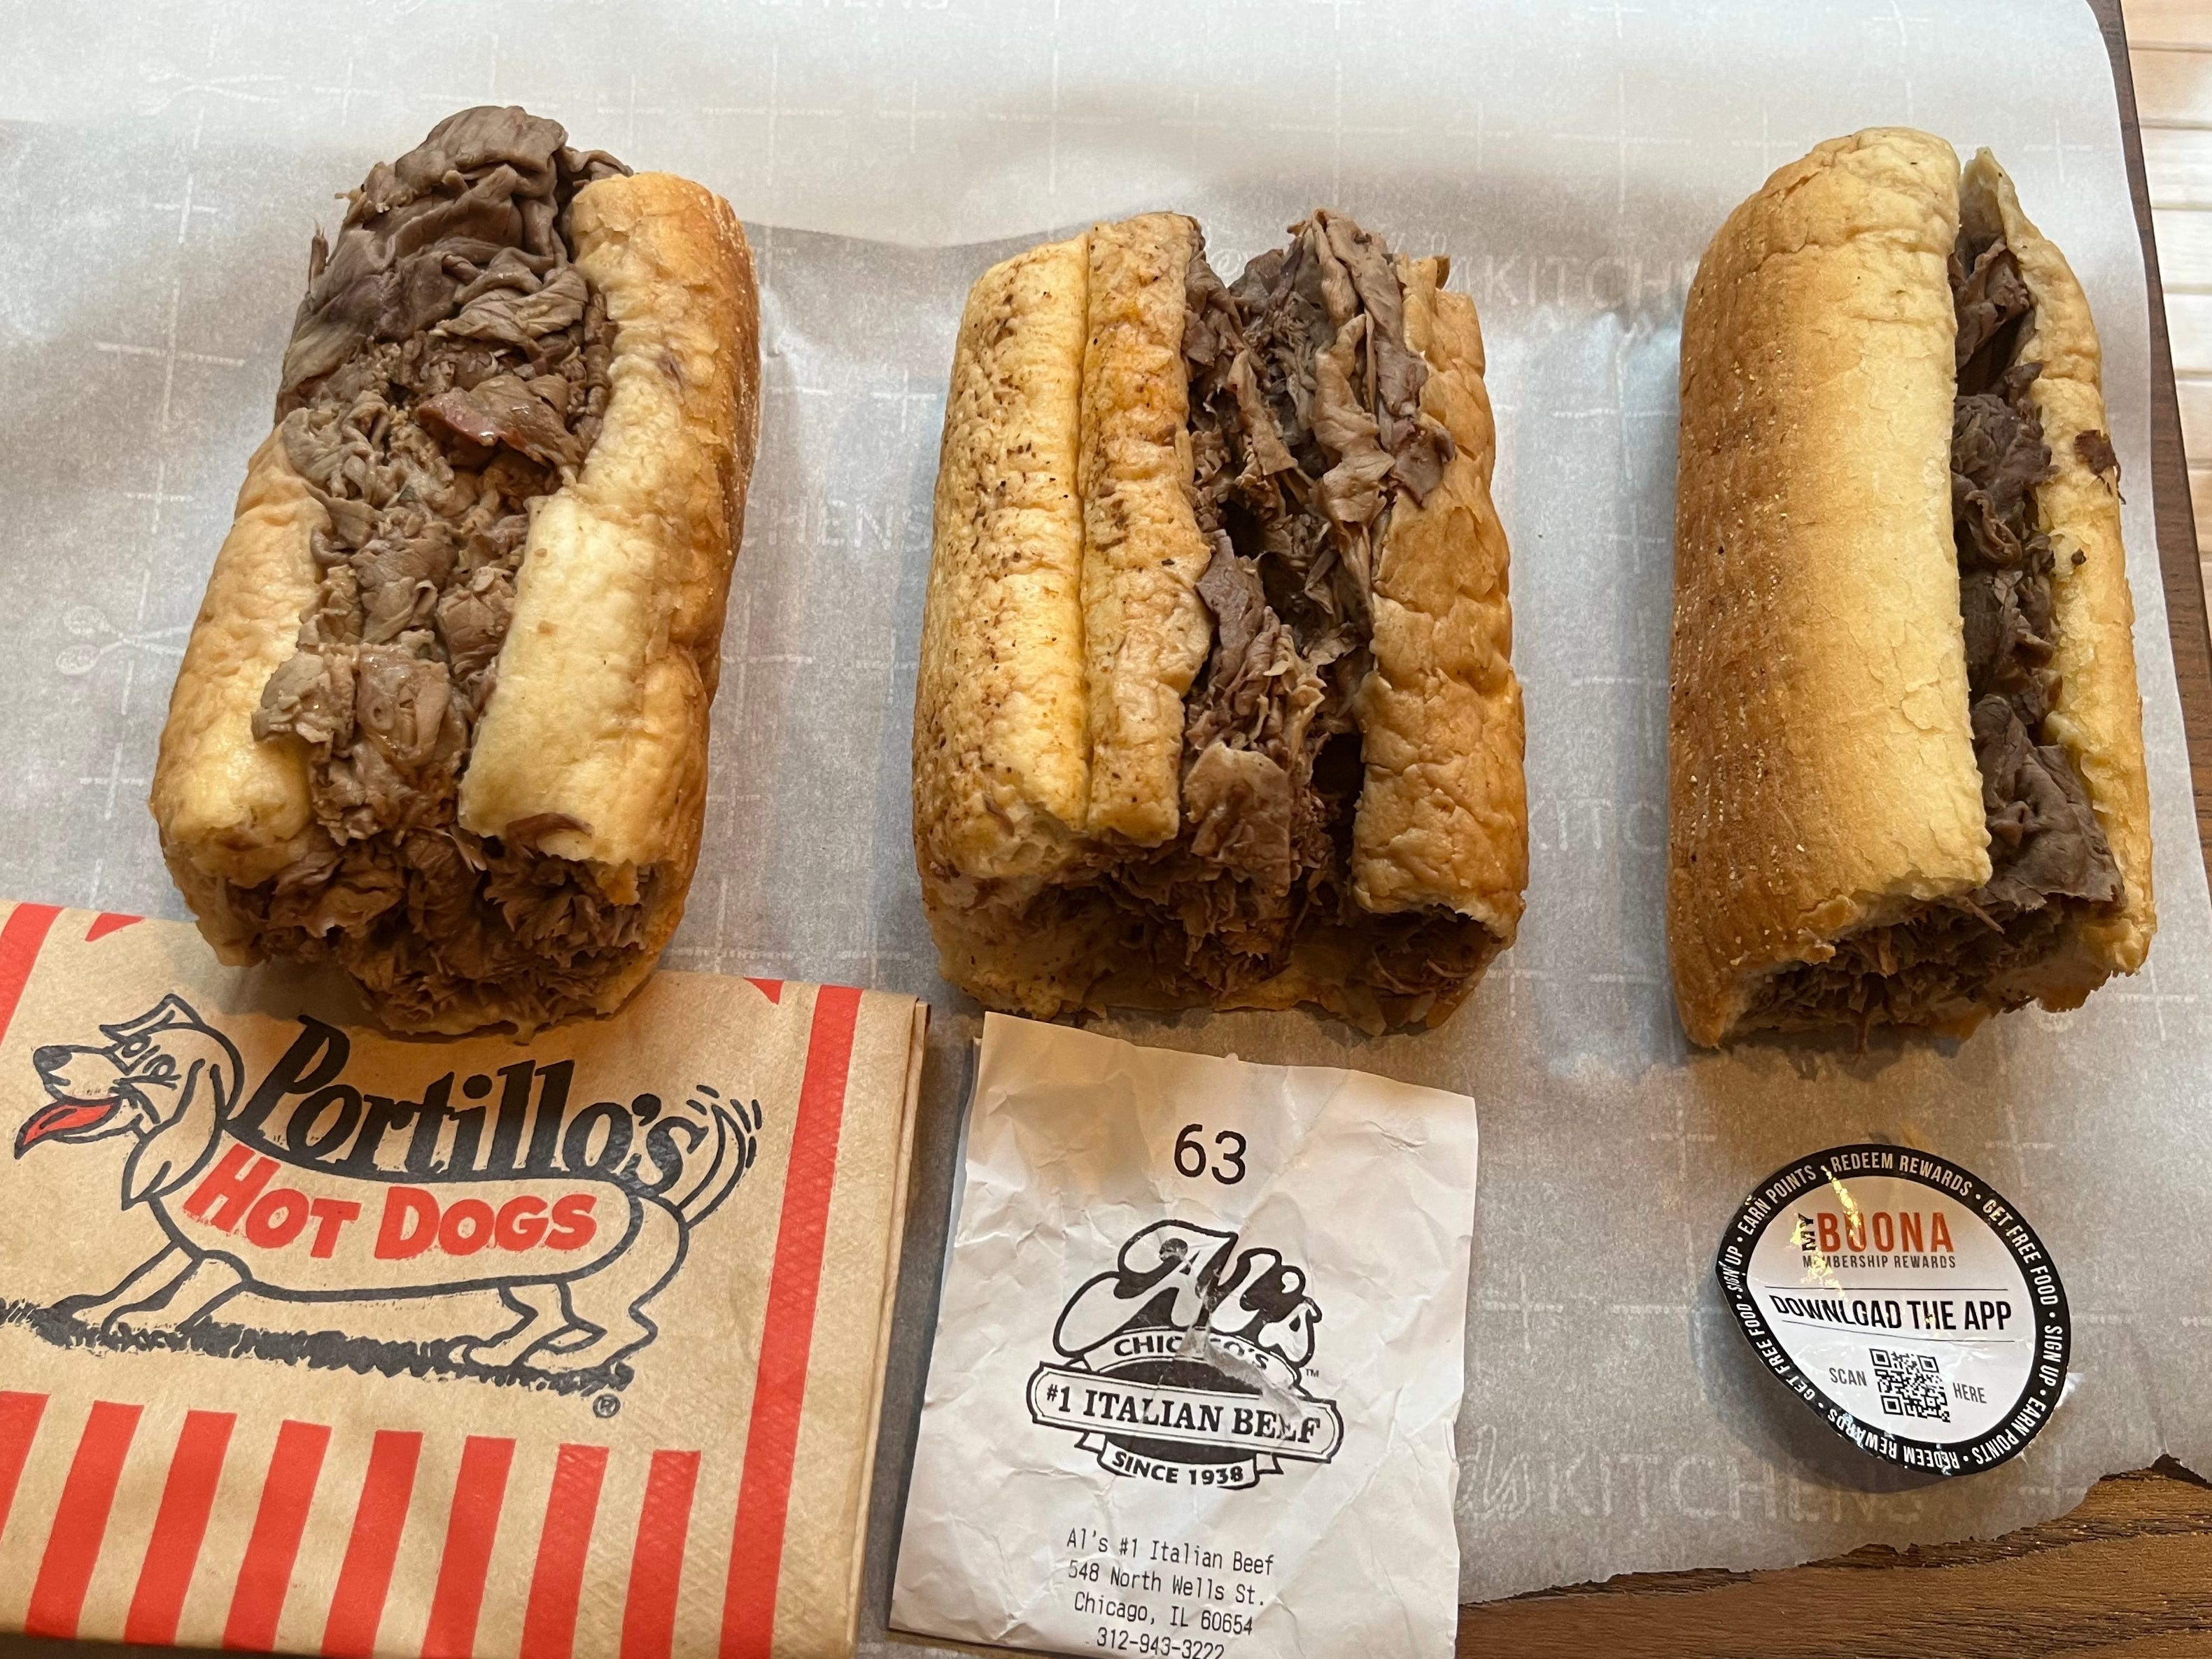 I tried Italian beef from 3 popular Chicago chains, and there's only one sandwich I'd order again